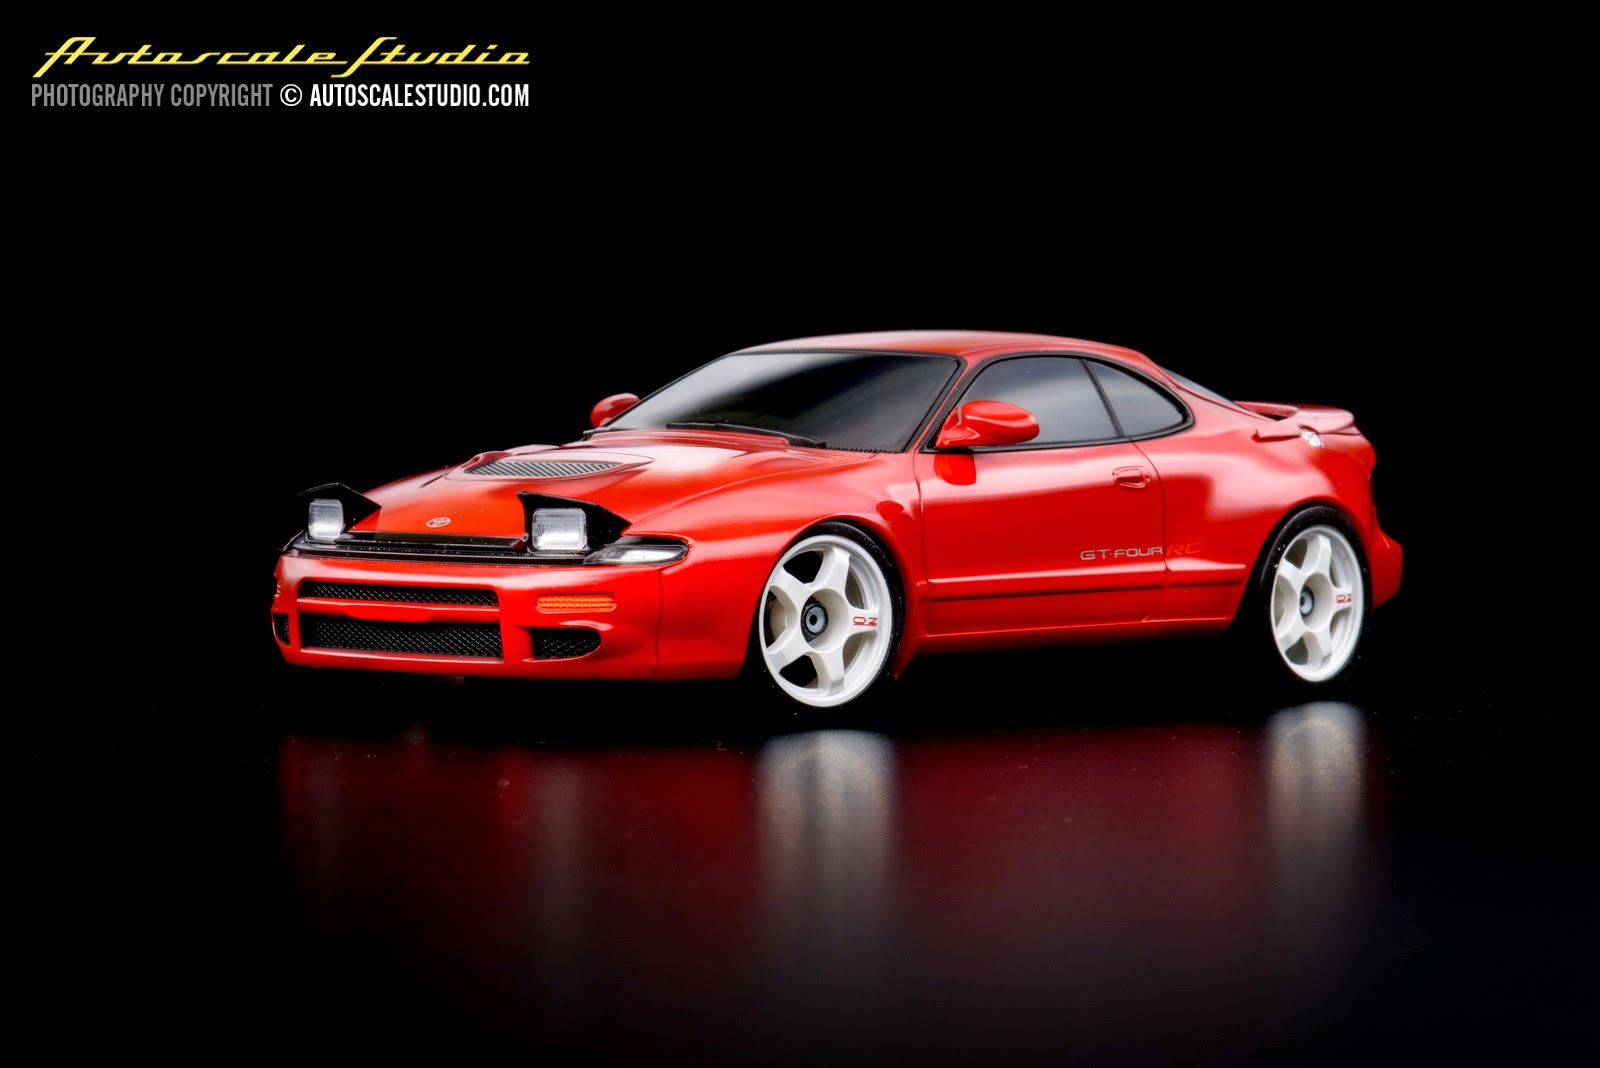 autoscale オートスケール・スタジオ: MZP418R Toyota CELICA GT-FOUR RC Red